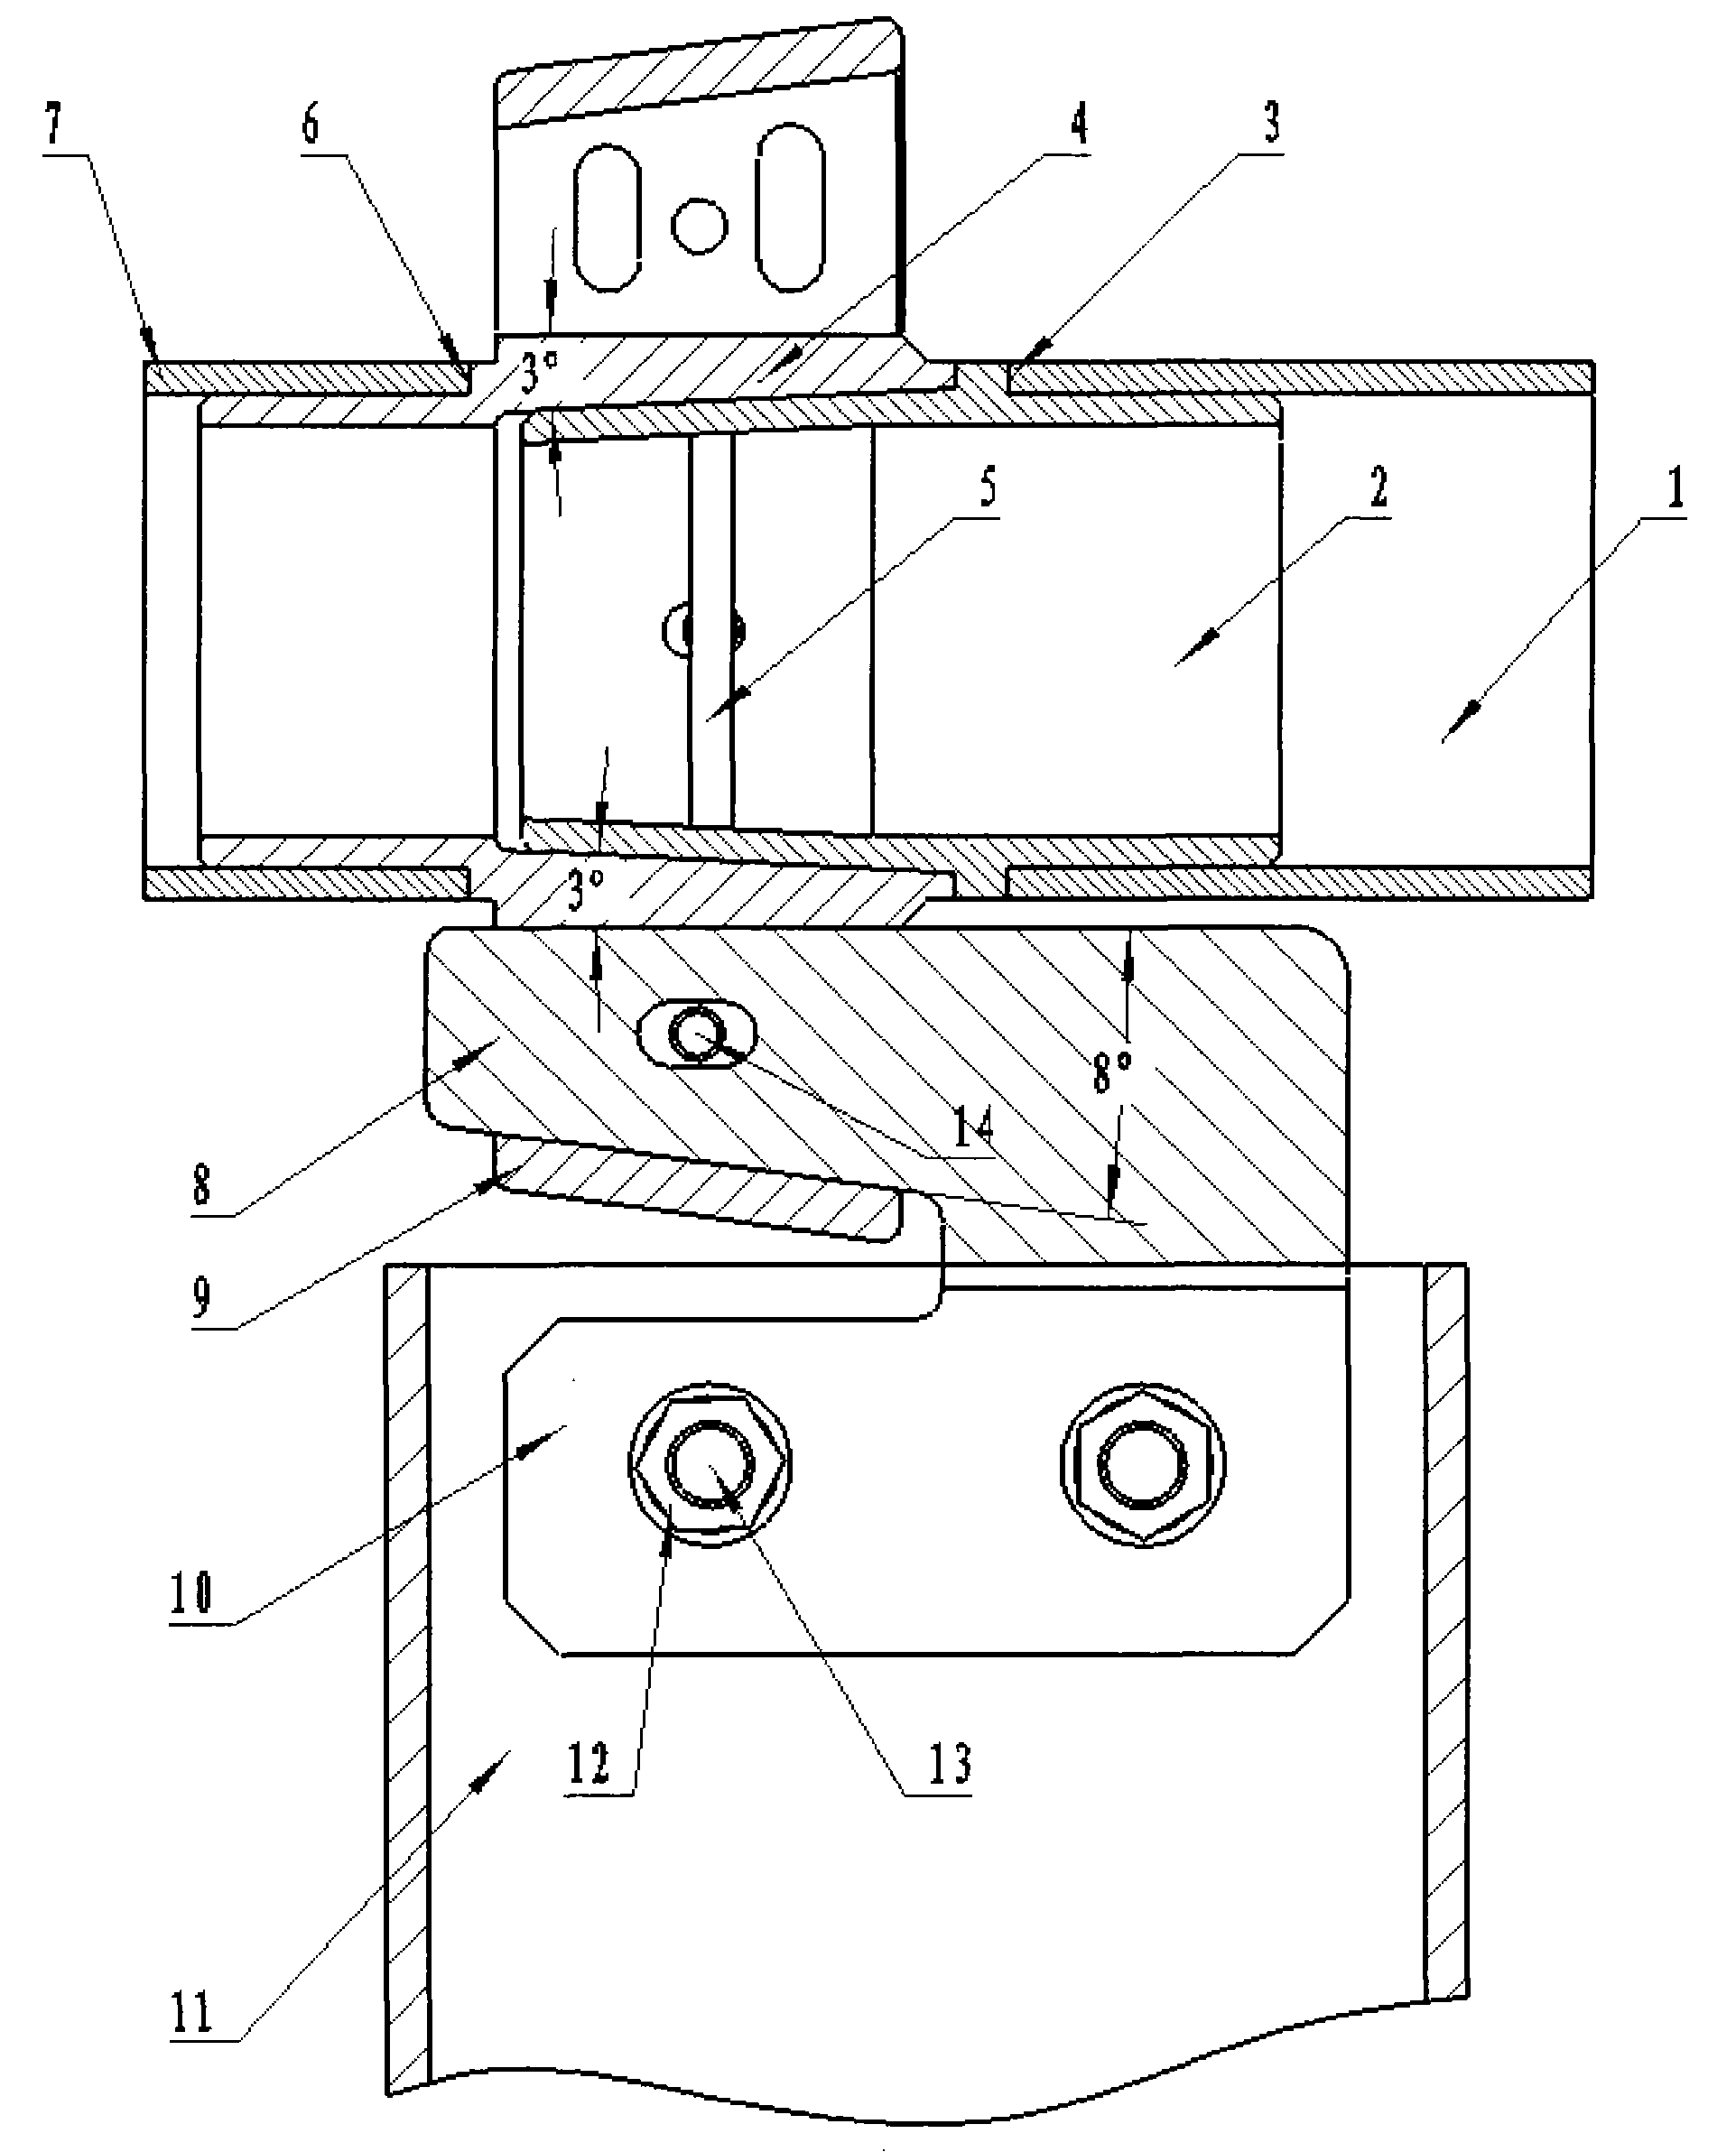 Butt connecting component for light steel structured housing construction